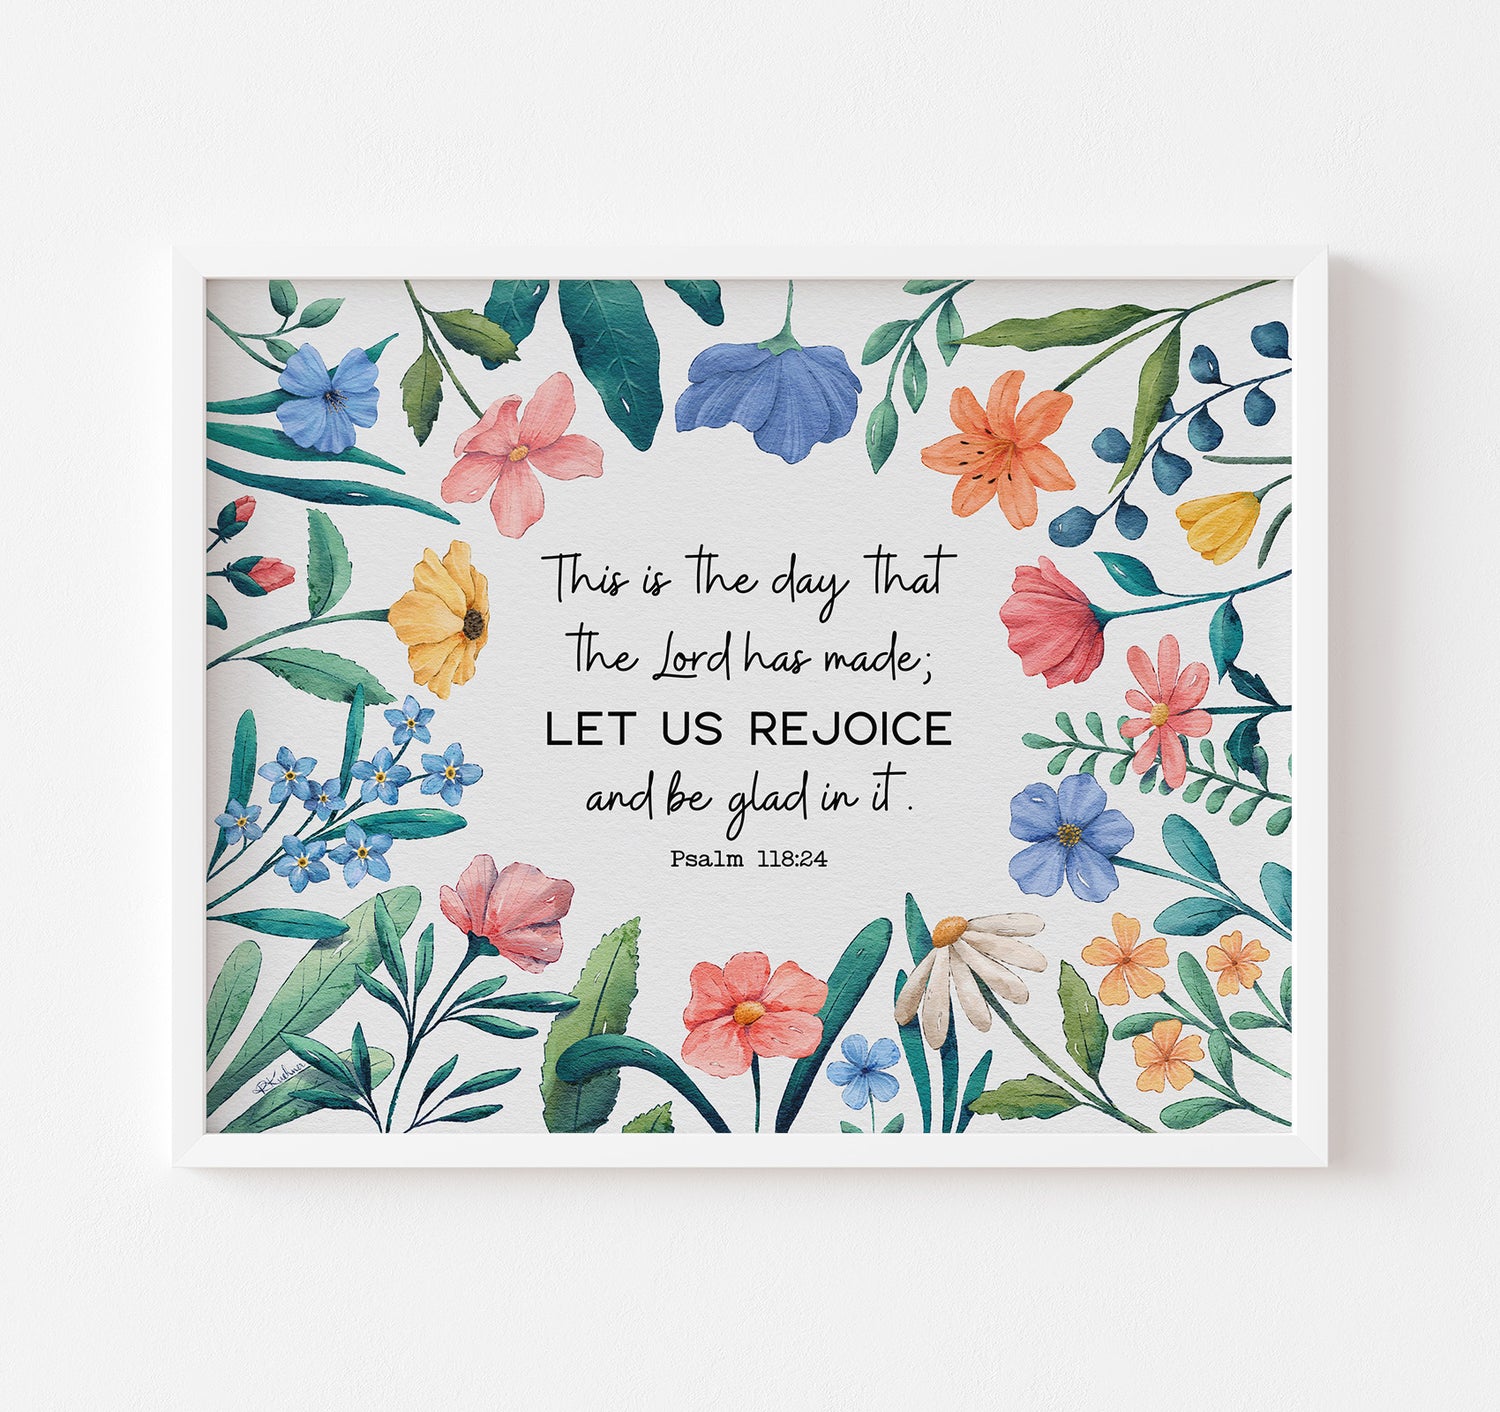 Art print with the Psalm 118:24 Bible verse This is the day that the Lord has made; let us rejoice and be glad in it. This scripture is surrounded by watercolor wildflowers.